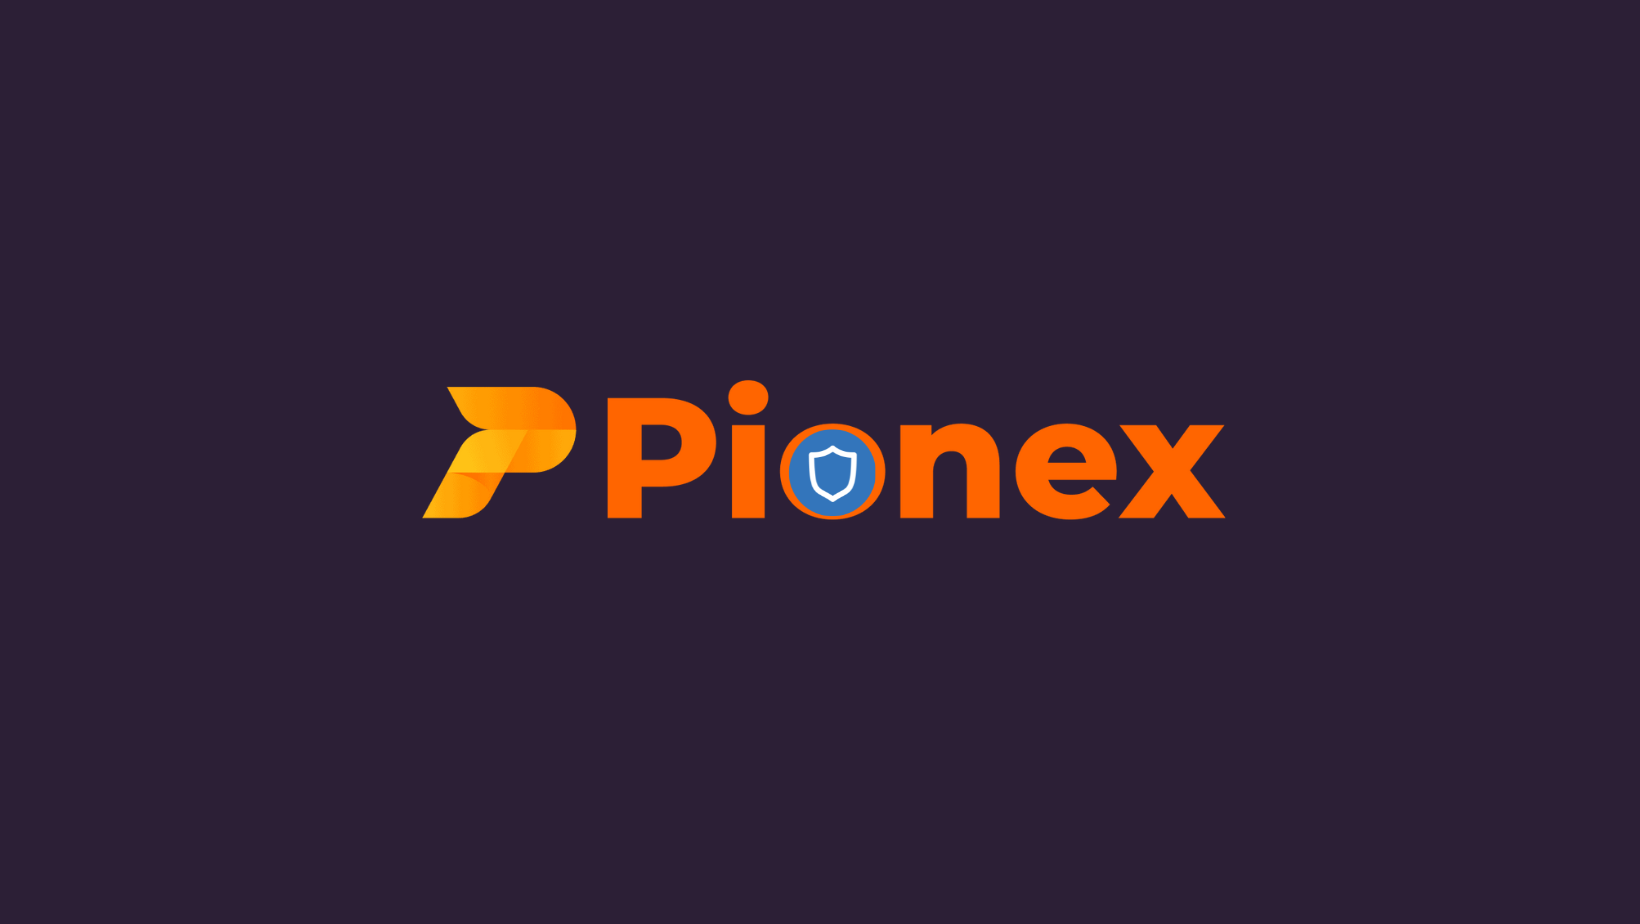 How to transfer from Trust Wallet to Pionex